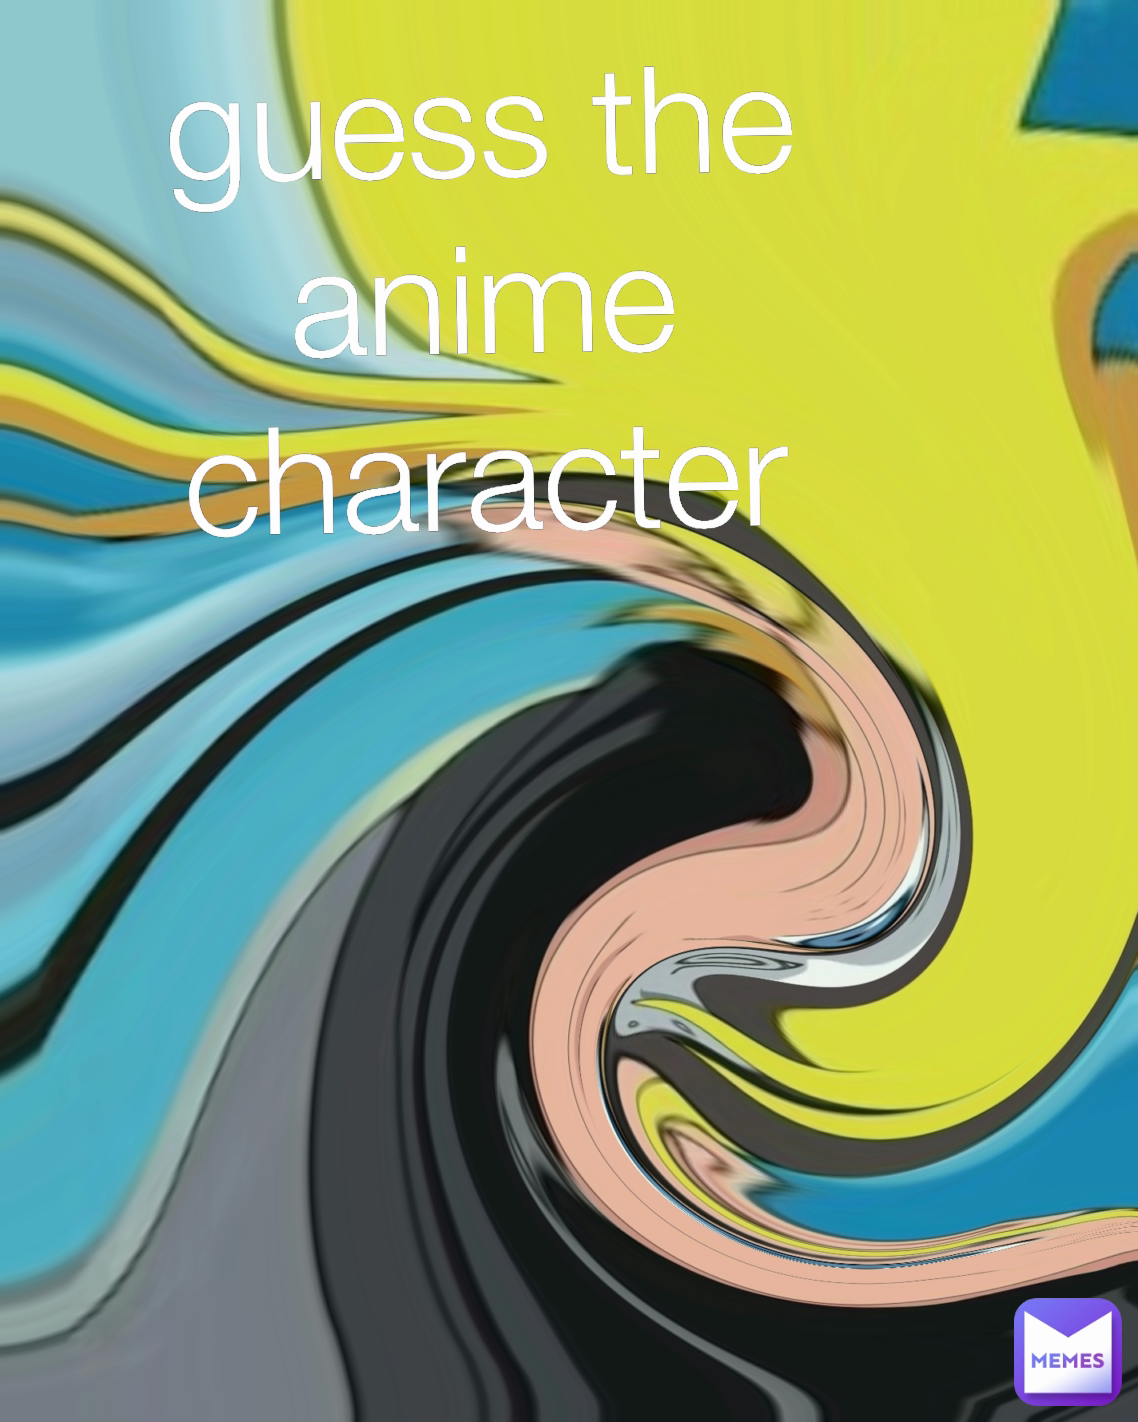 Guess That Anime Character, Gallery Style | Anime, Anime characters, Anime  character drawing